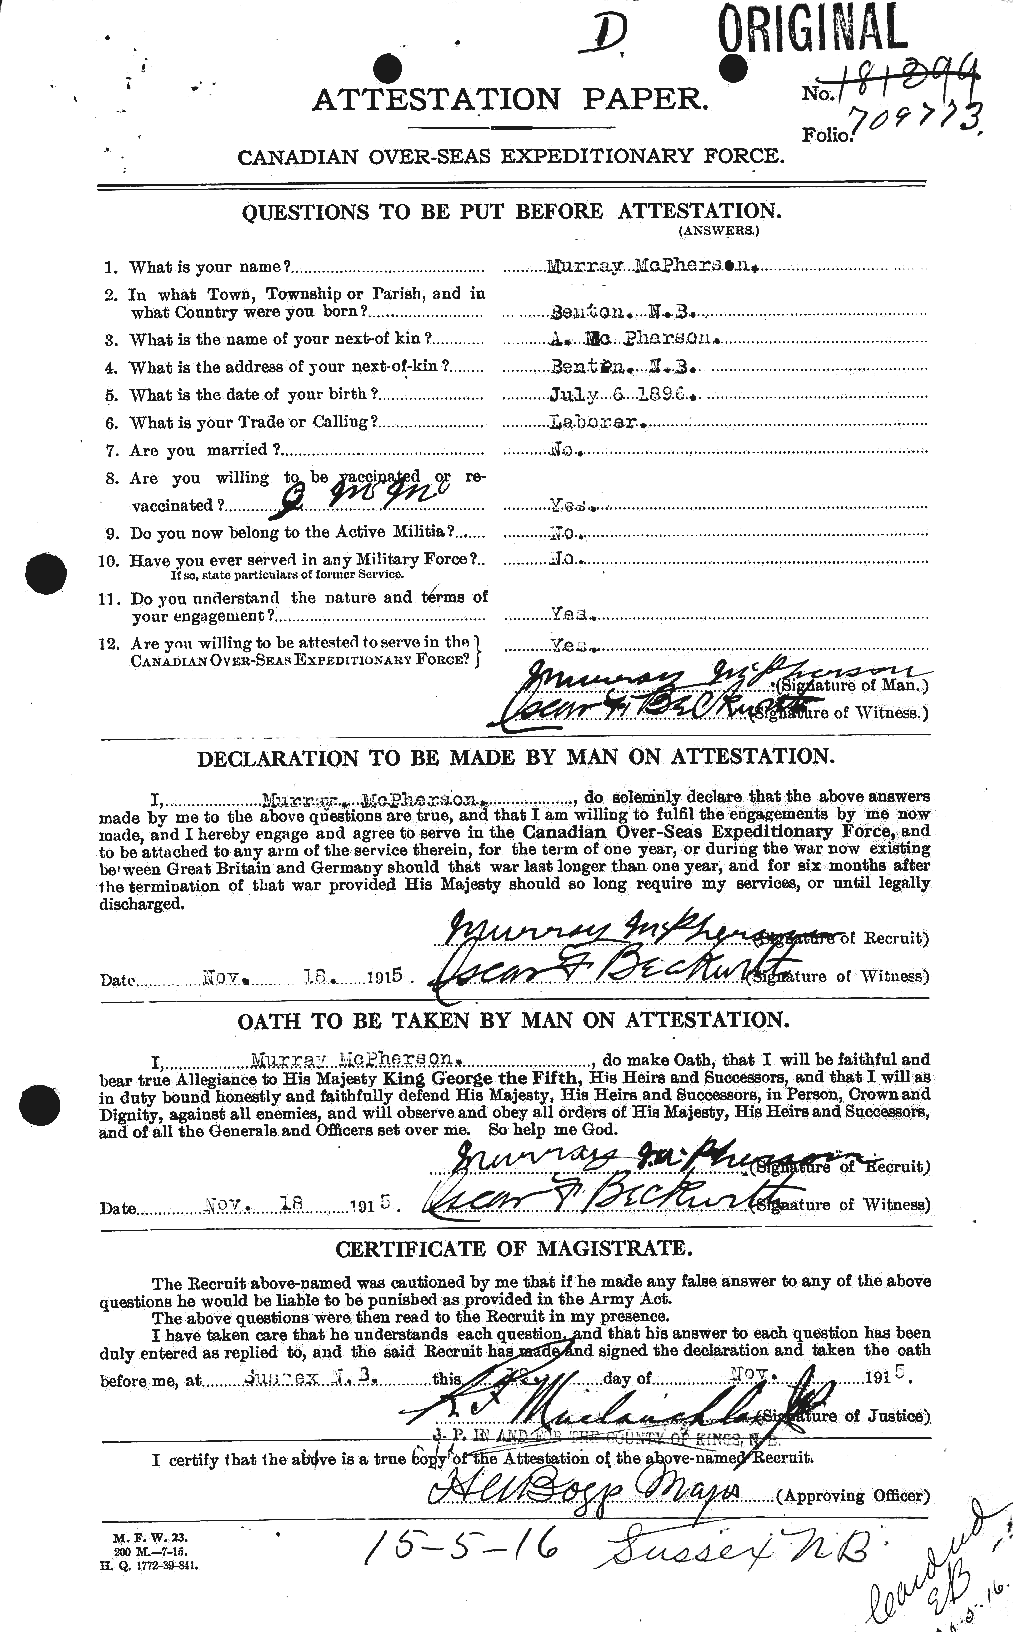 Personnel Records of the First World War - CEF 543213a